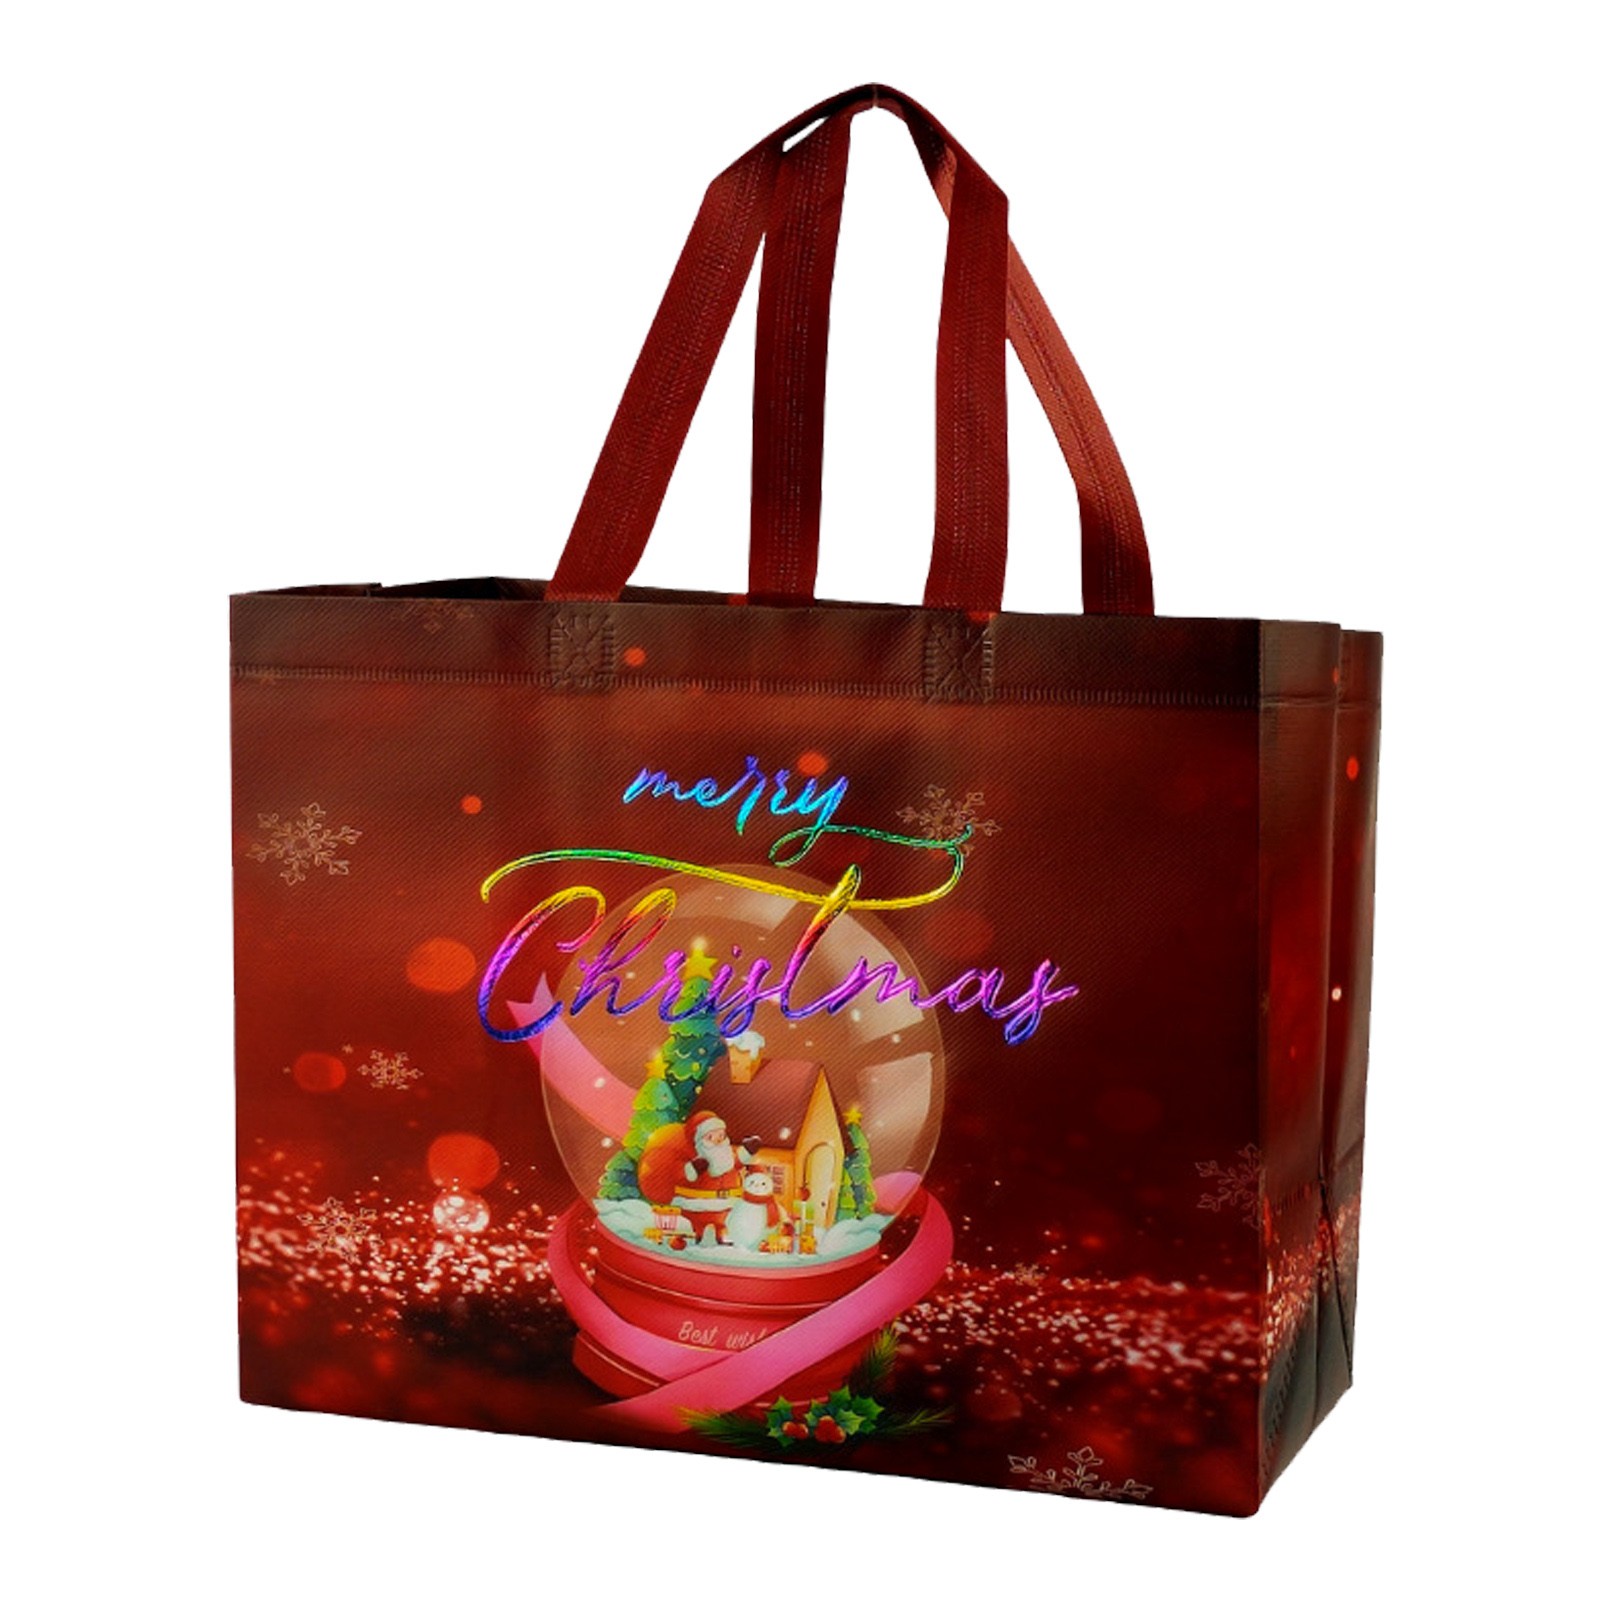 YHAIOGS Christmas Cartoon Coated Non Woven Gift Bag Friendly tote Bag ...